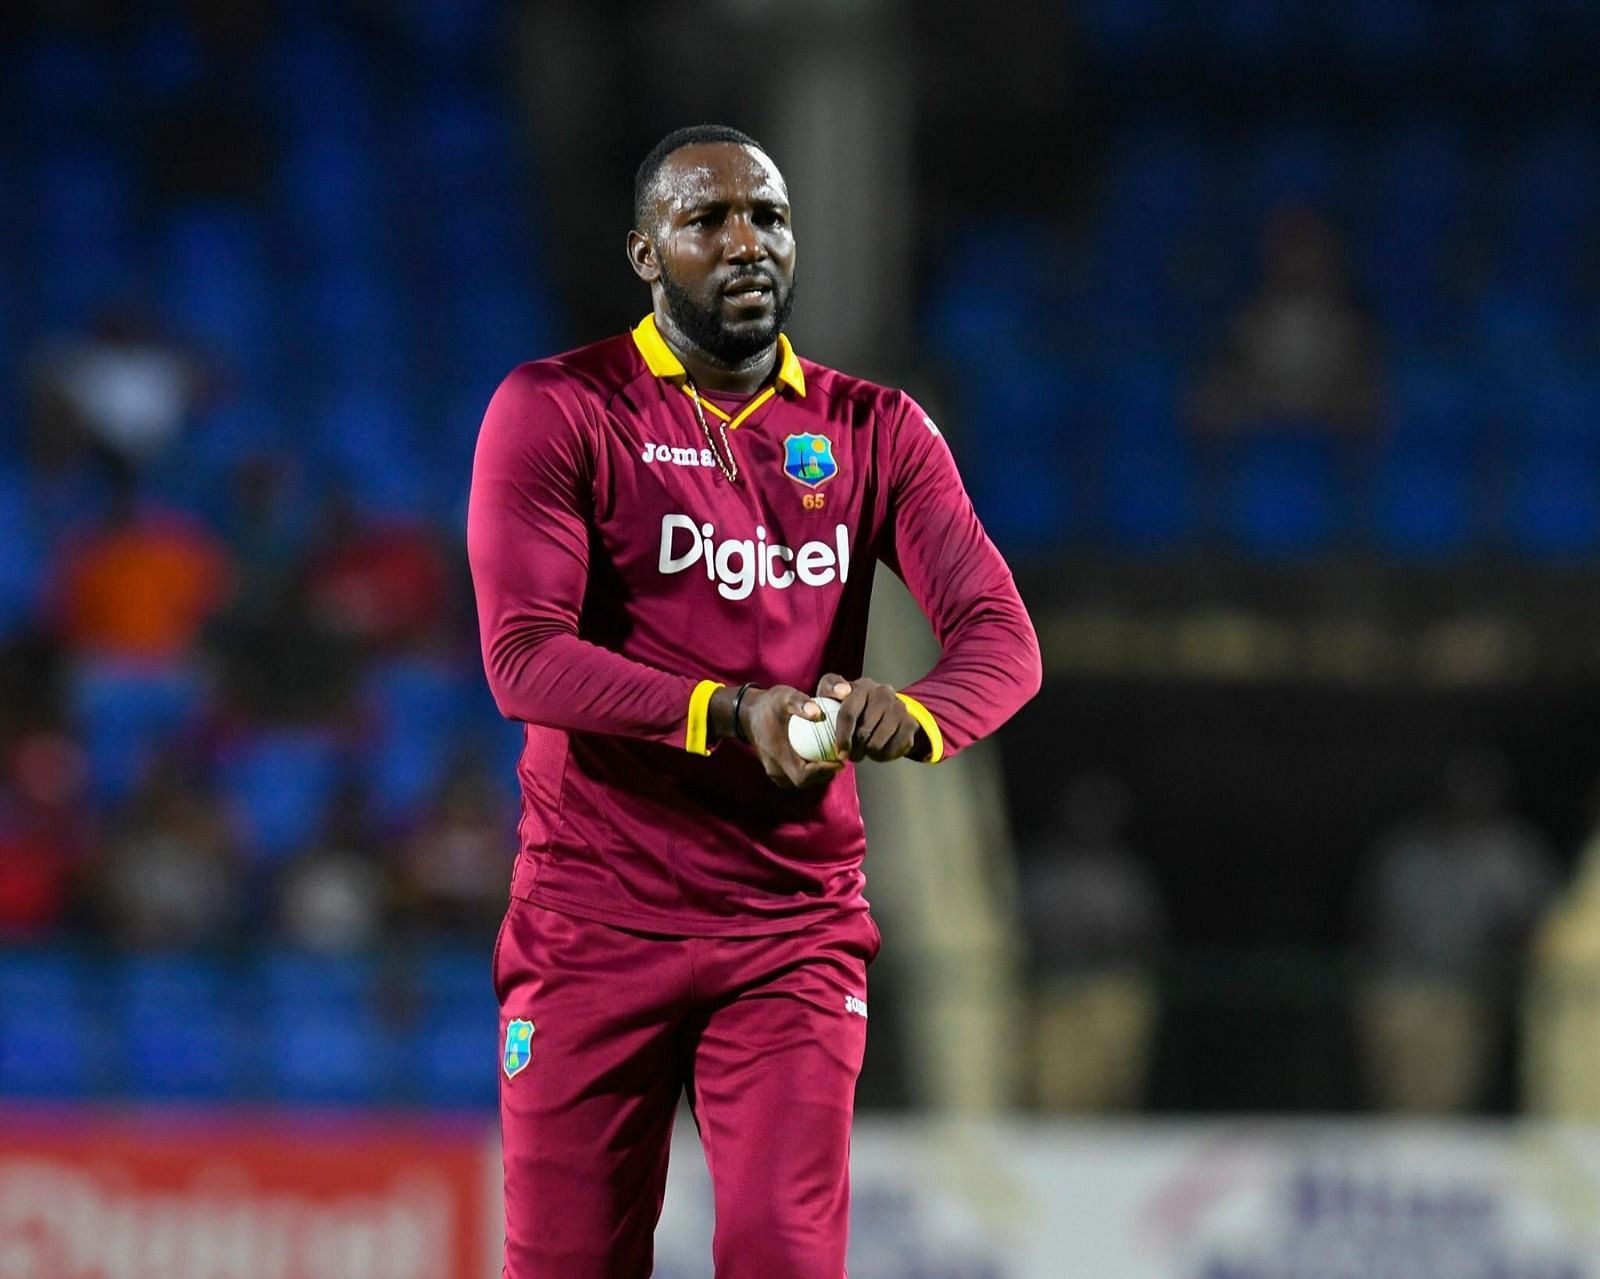 Kesrick Williams in action for West Indies (Image Credits: Twitter/Windies Cricket)